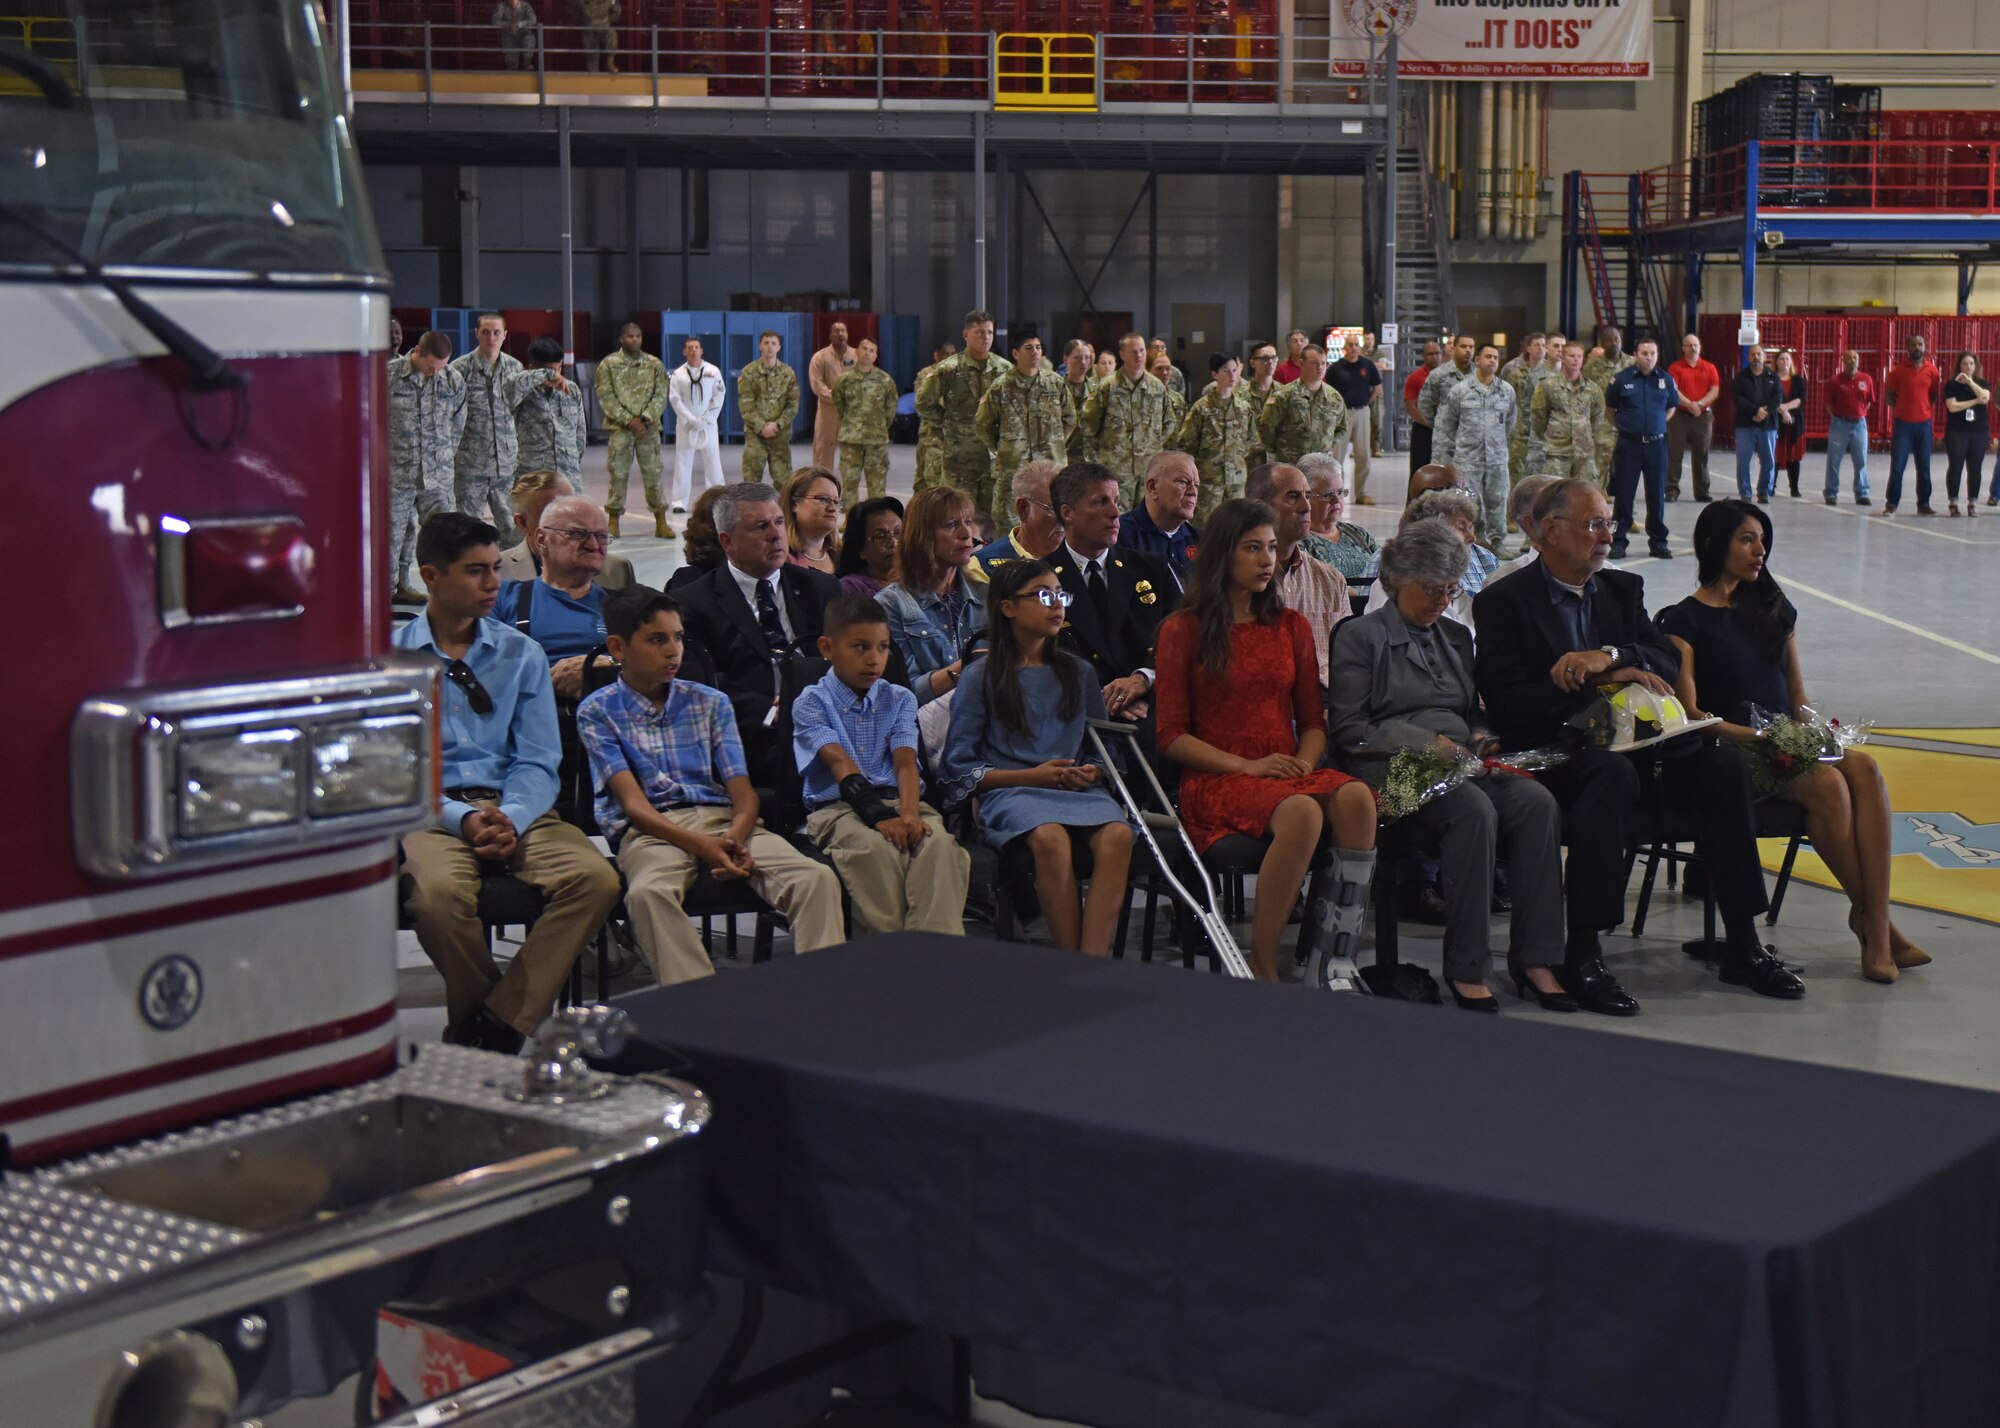 The family of Shane Hennessey attend the Firefighter Memorial Ceremony held in the Louis F. Garland Department of Defense Fire Academy High Bay at Goodfellow Air Force Base, Texas, May 3, 2019. Hennessey was recognized during the ceremony, which honors all DOD firefighters who have lost their lives. (U.S. Air Force photo by Airman 1st Class Zachary Chapman/Released)